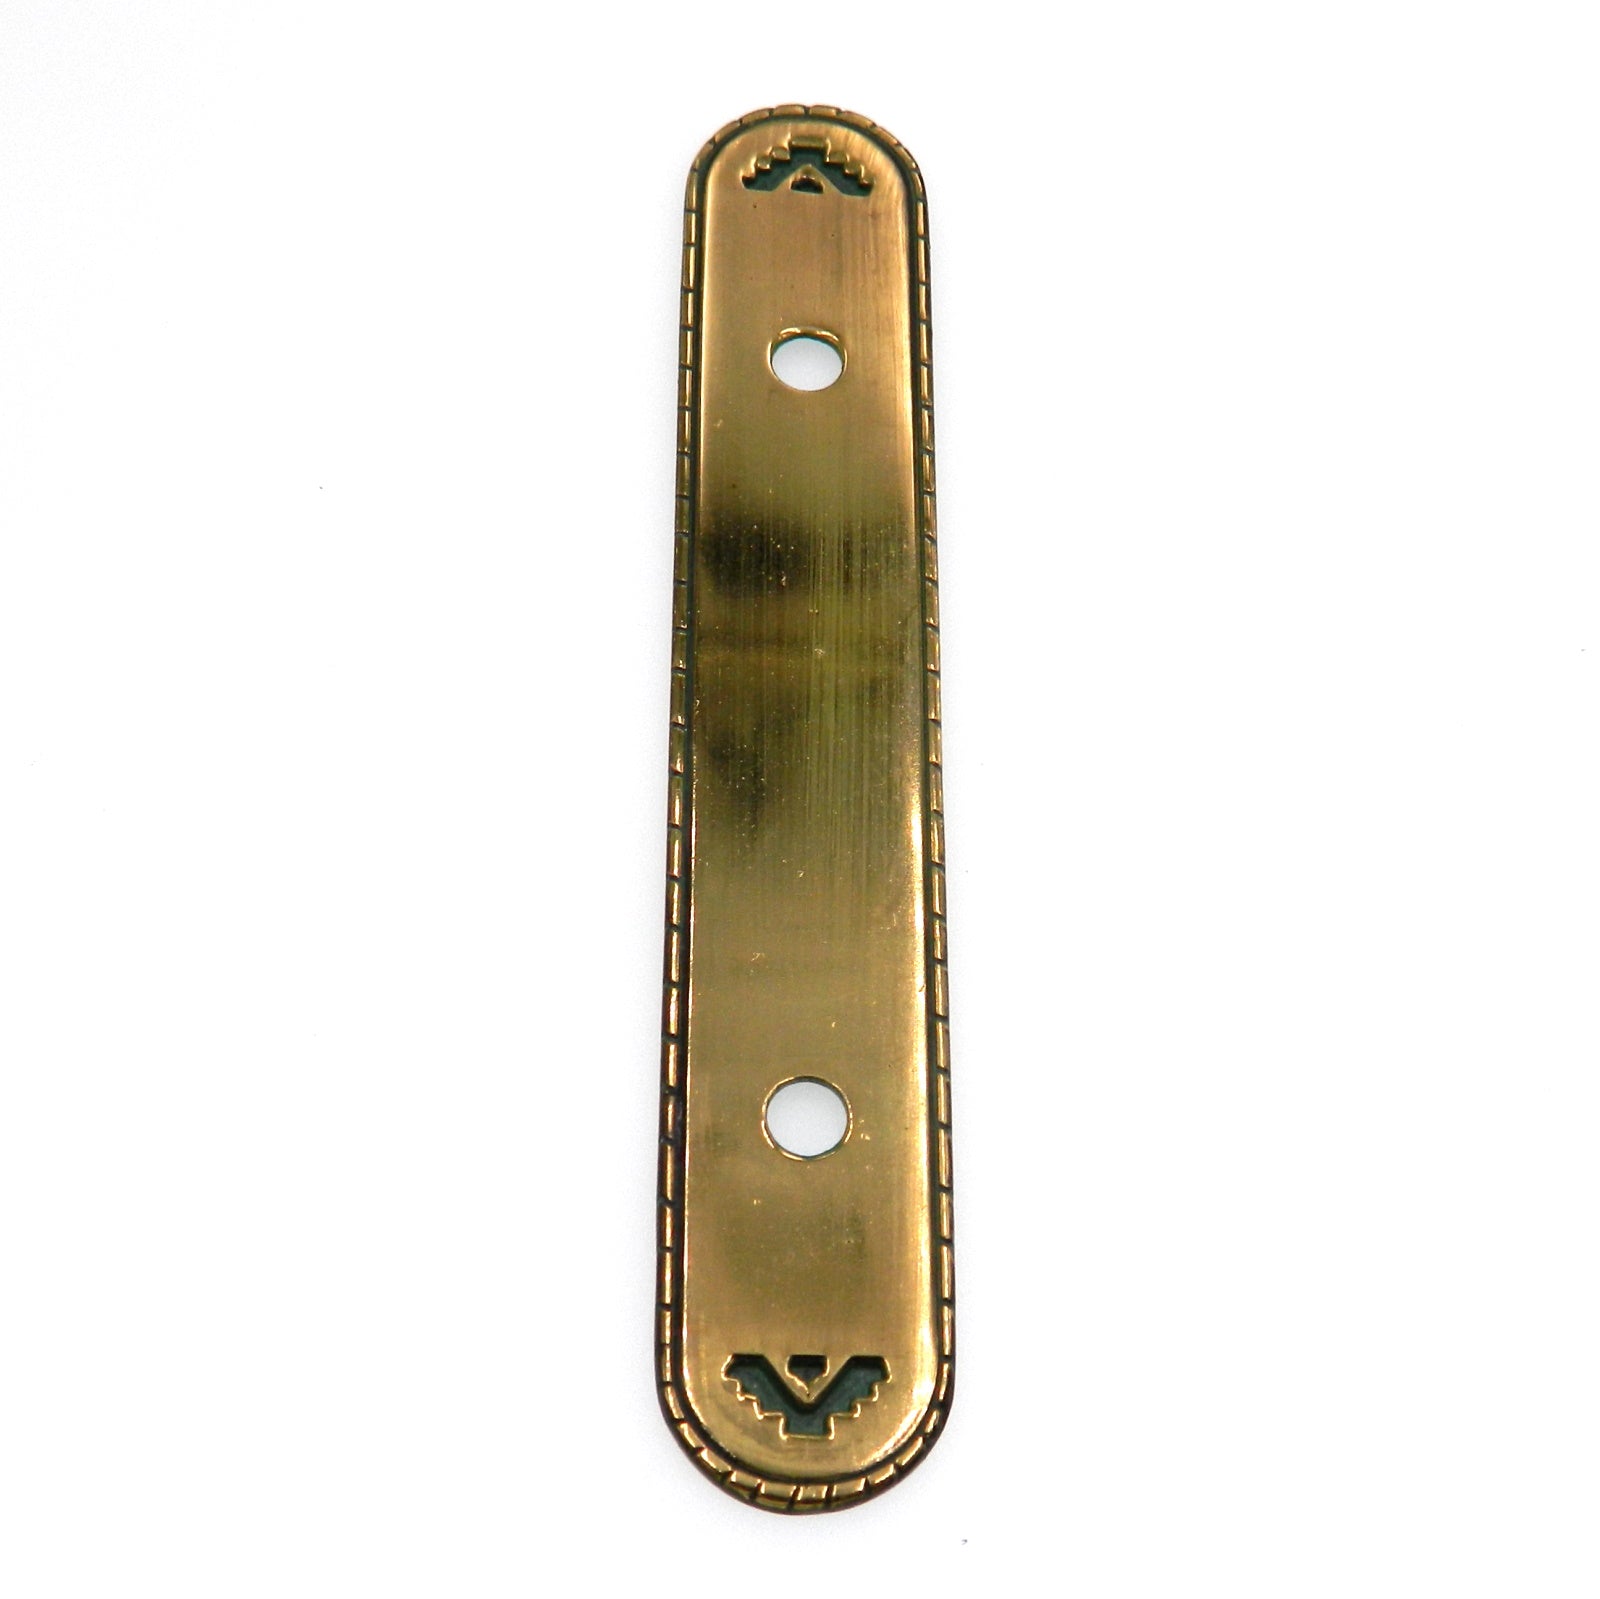 Belwith Southwest Lodge Verde Antique Backplate For 3" Ctr. Cabinet Pull Handle 